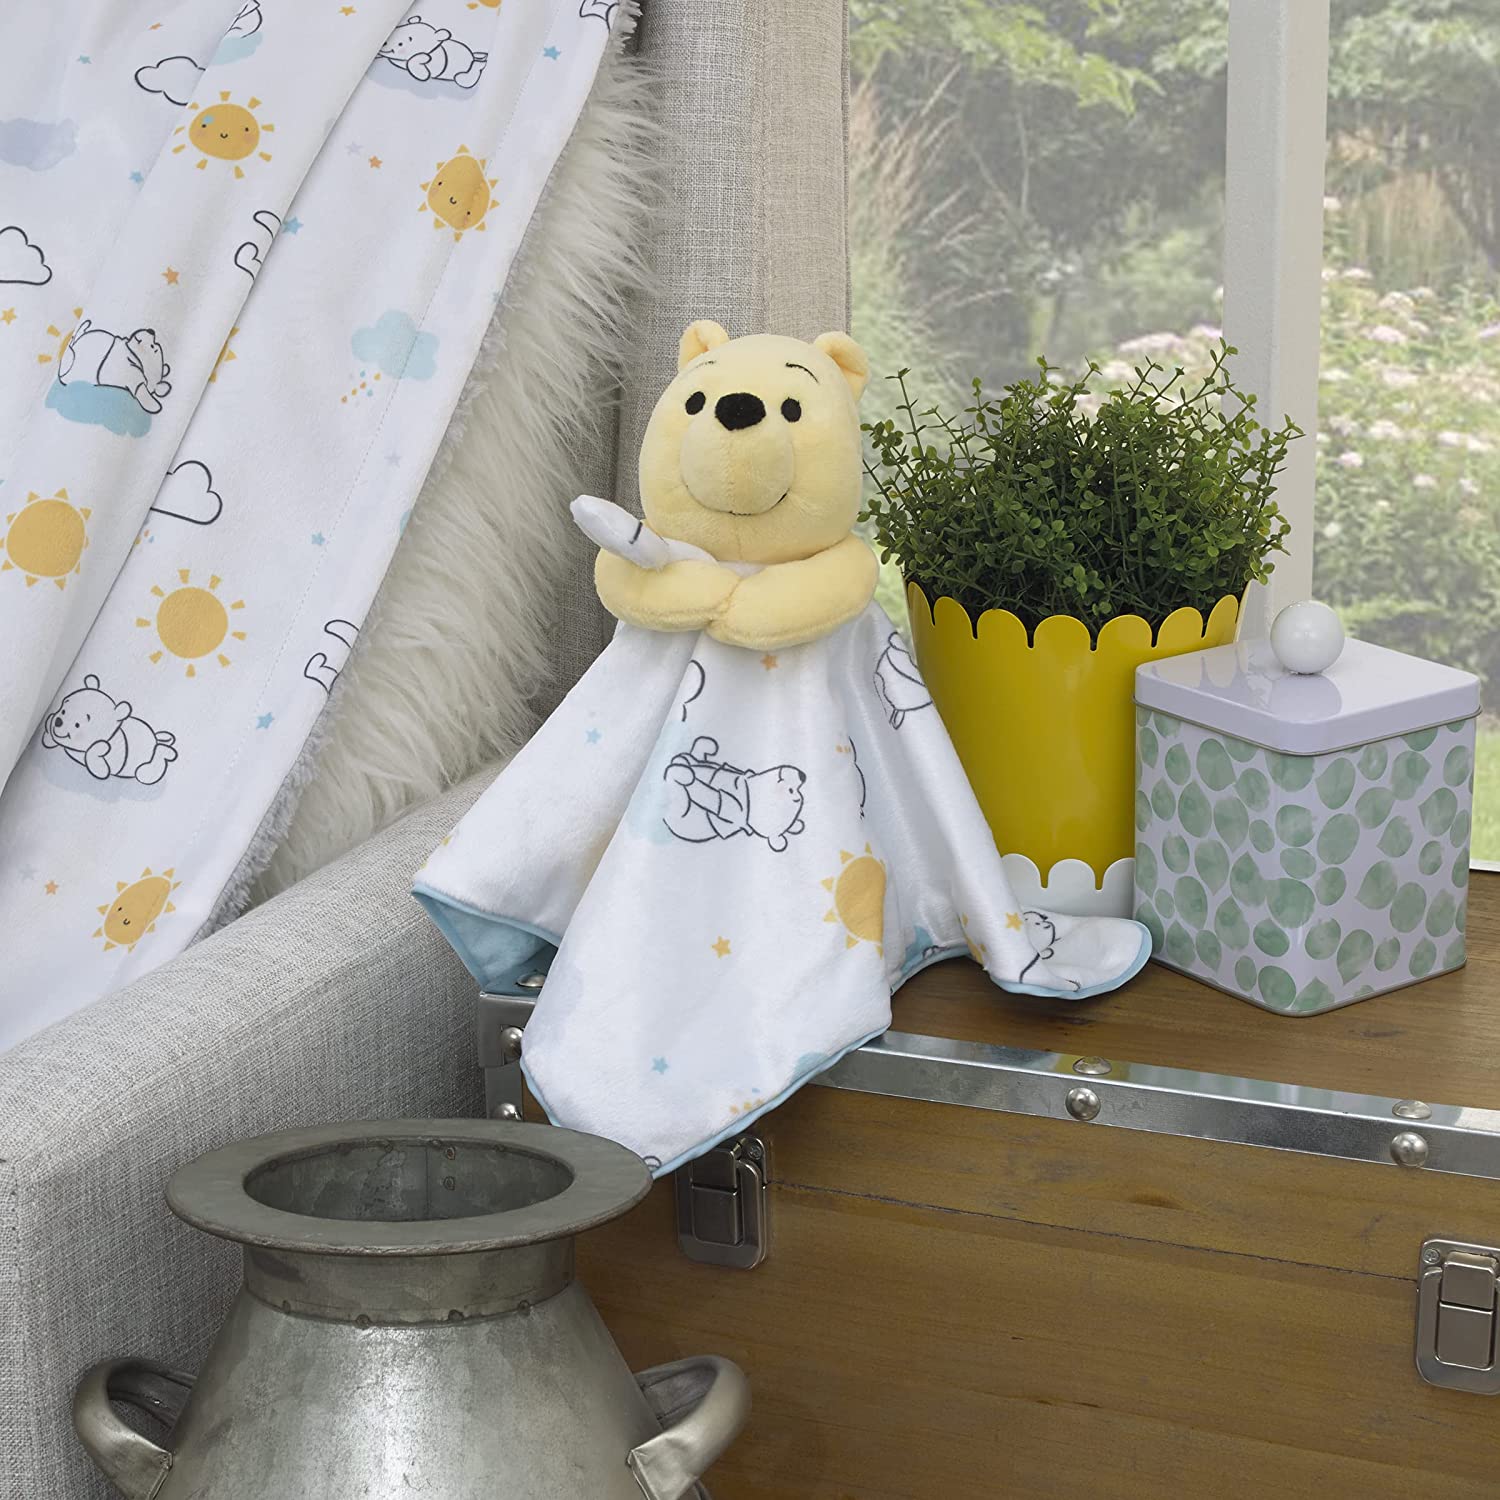 Disney Winnie The Pooh White, Yellow, and Aqua Cloud and Sun Lovey Security Blanket - image 4 of 5